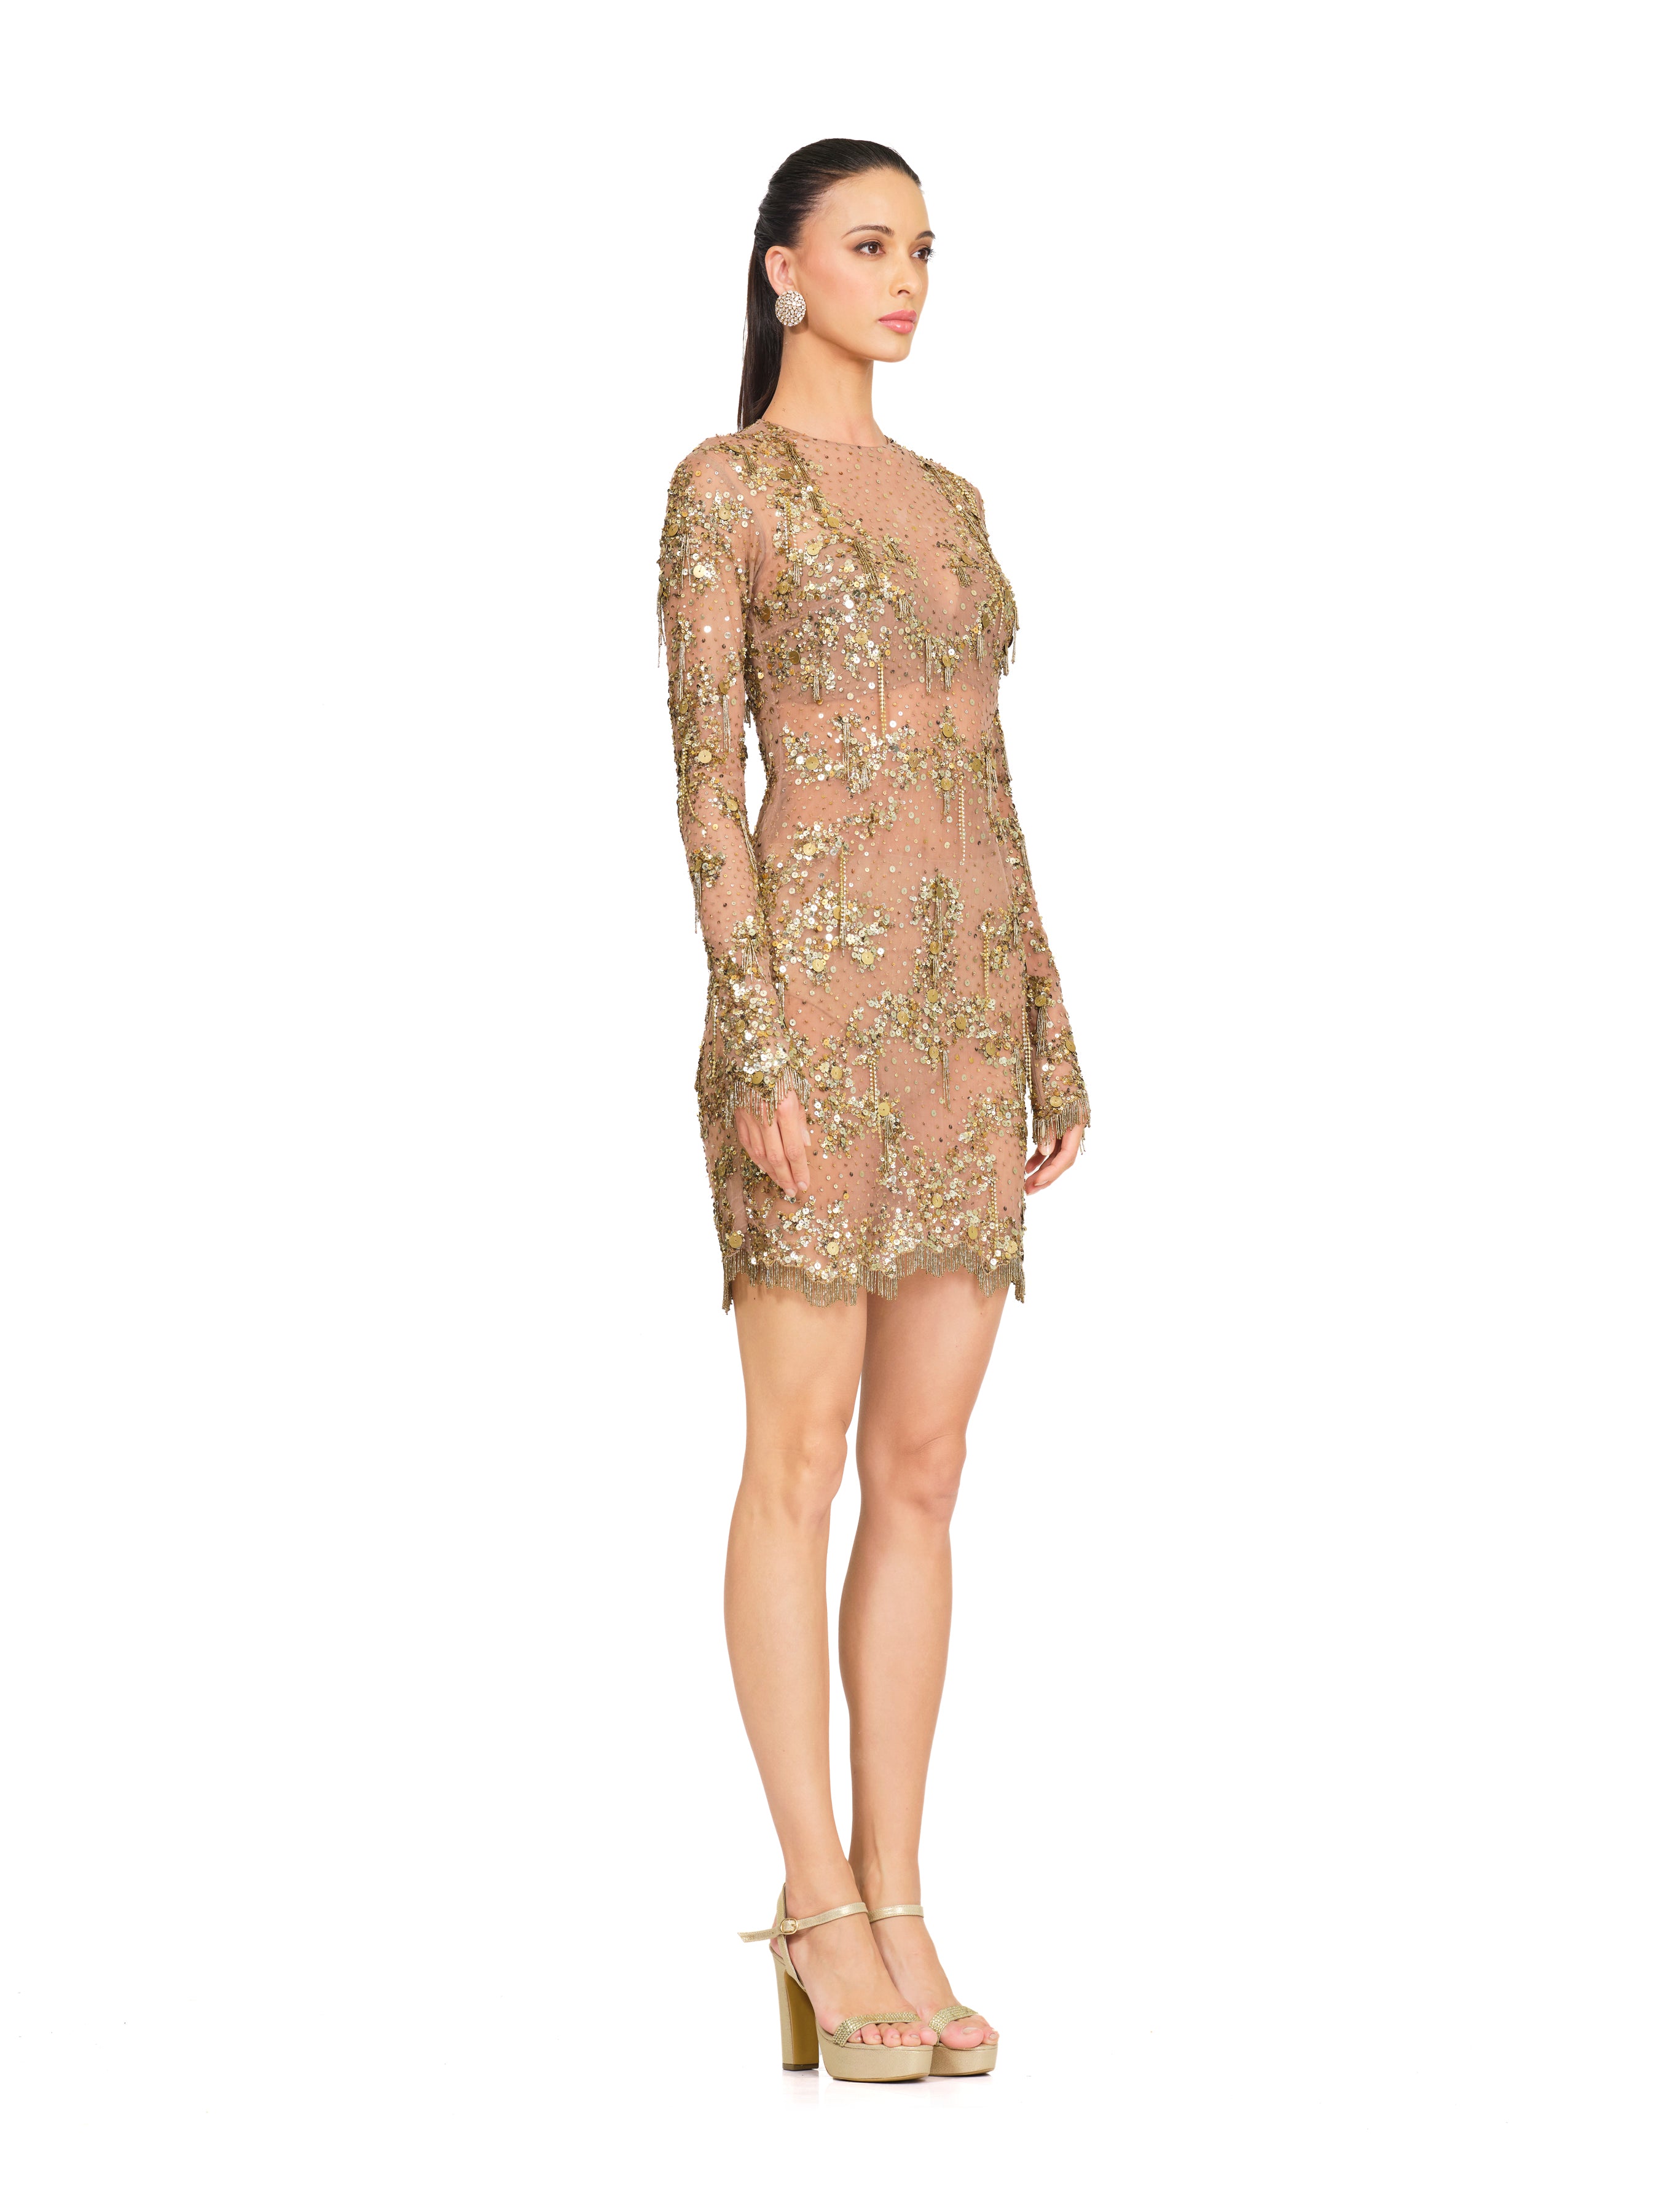 Gold Sheer Dress With Embroidery